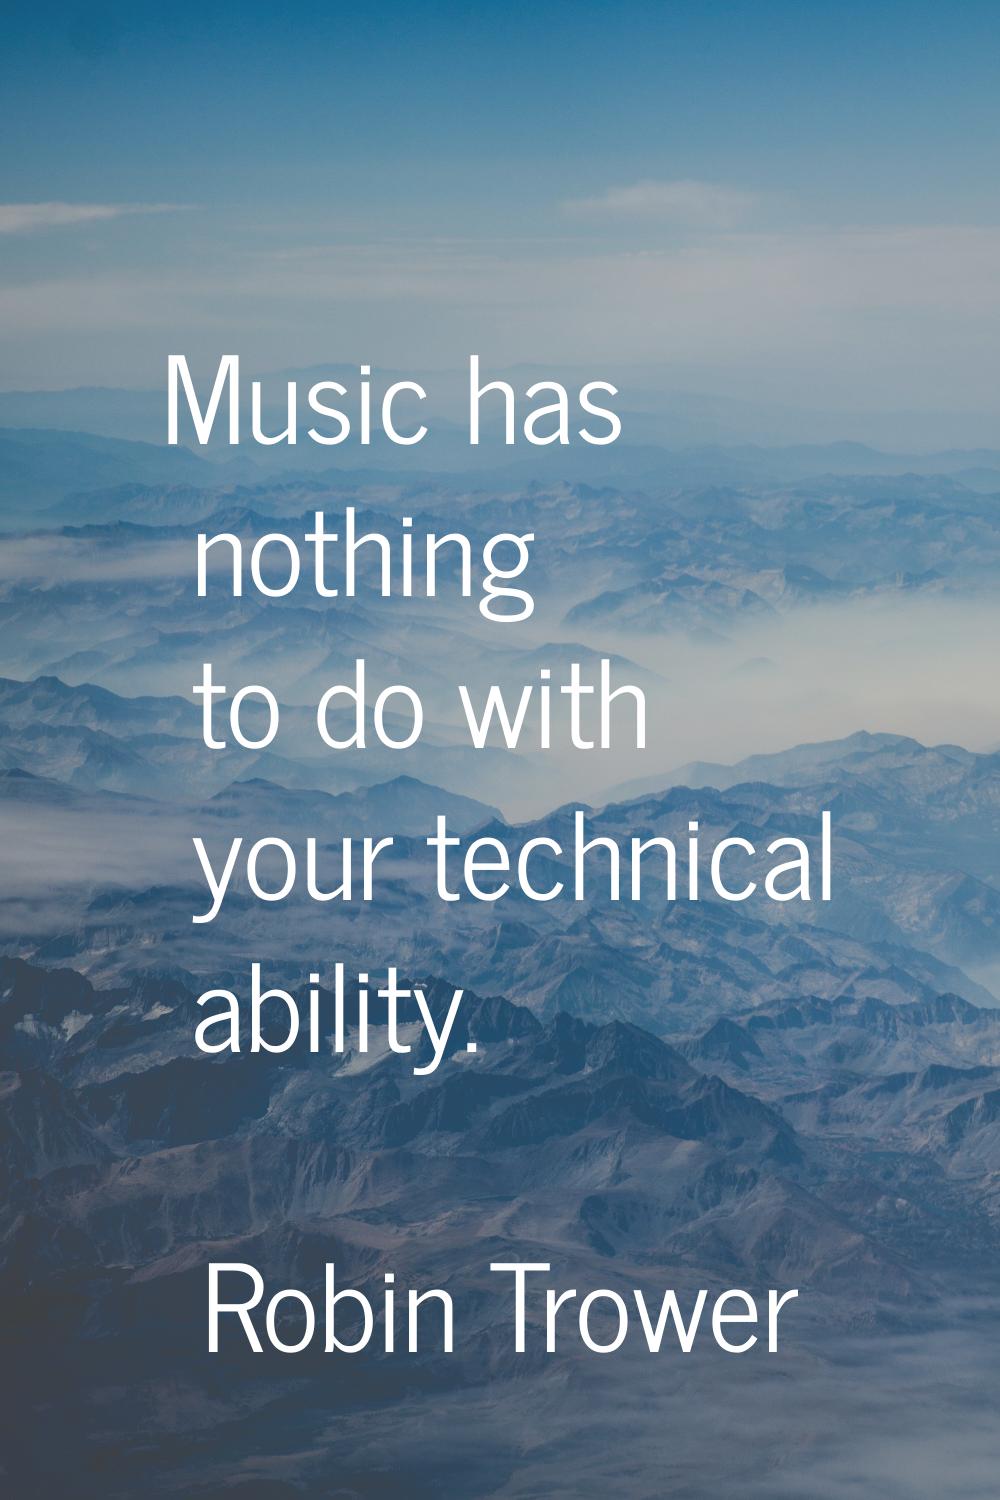 Music has nothing to do with your technical ability.